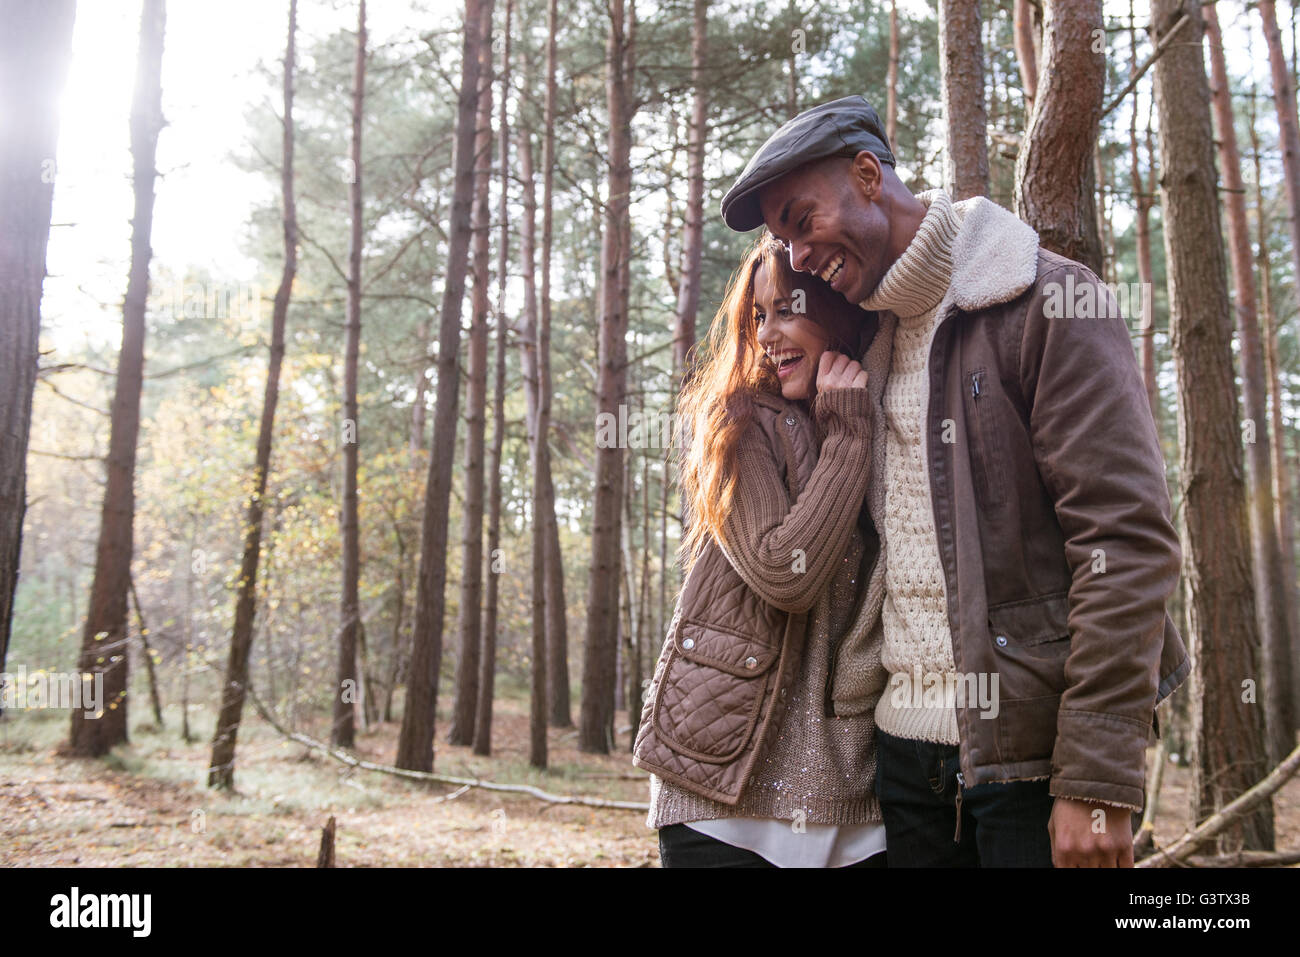 A young couple enjoying a forest walk in Autumn. Stock Photo